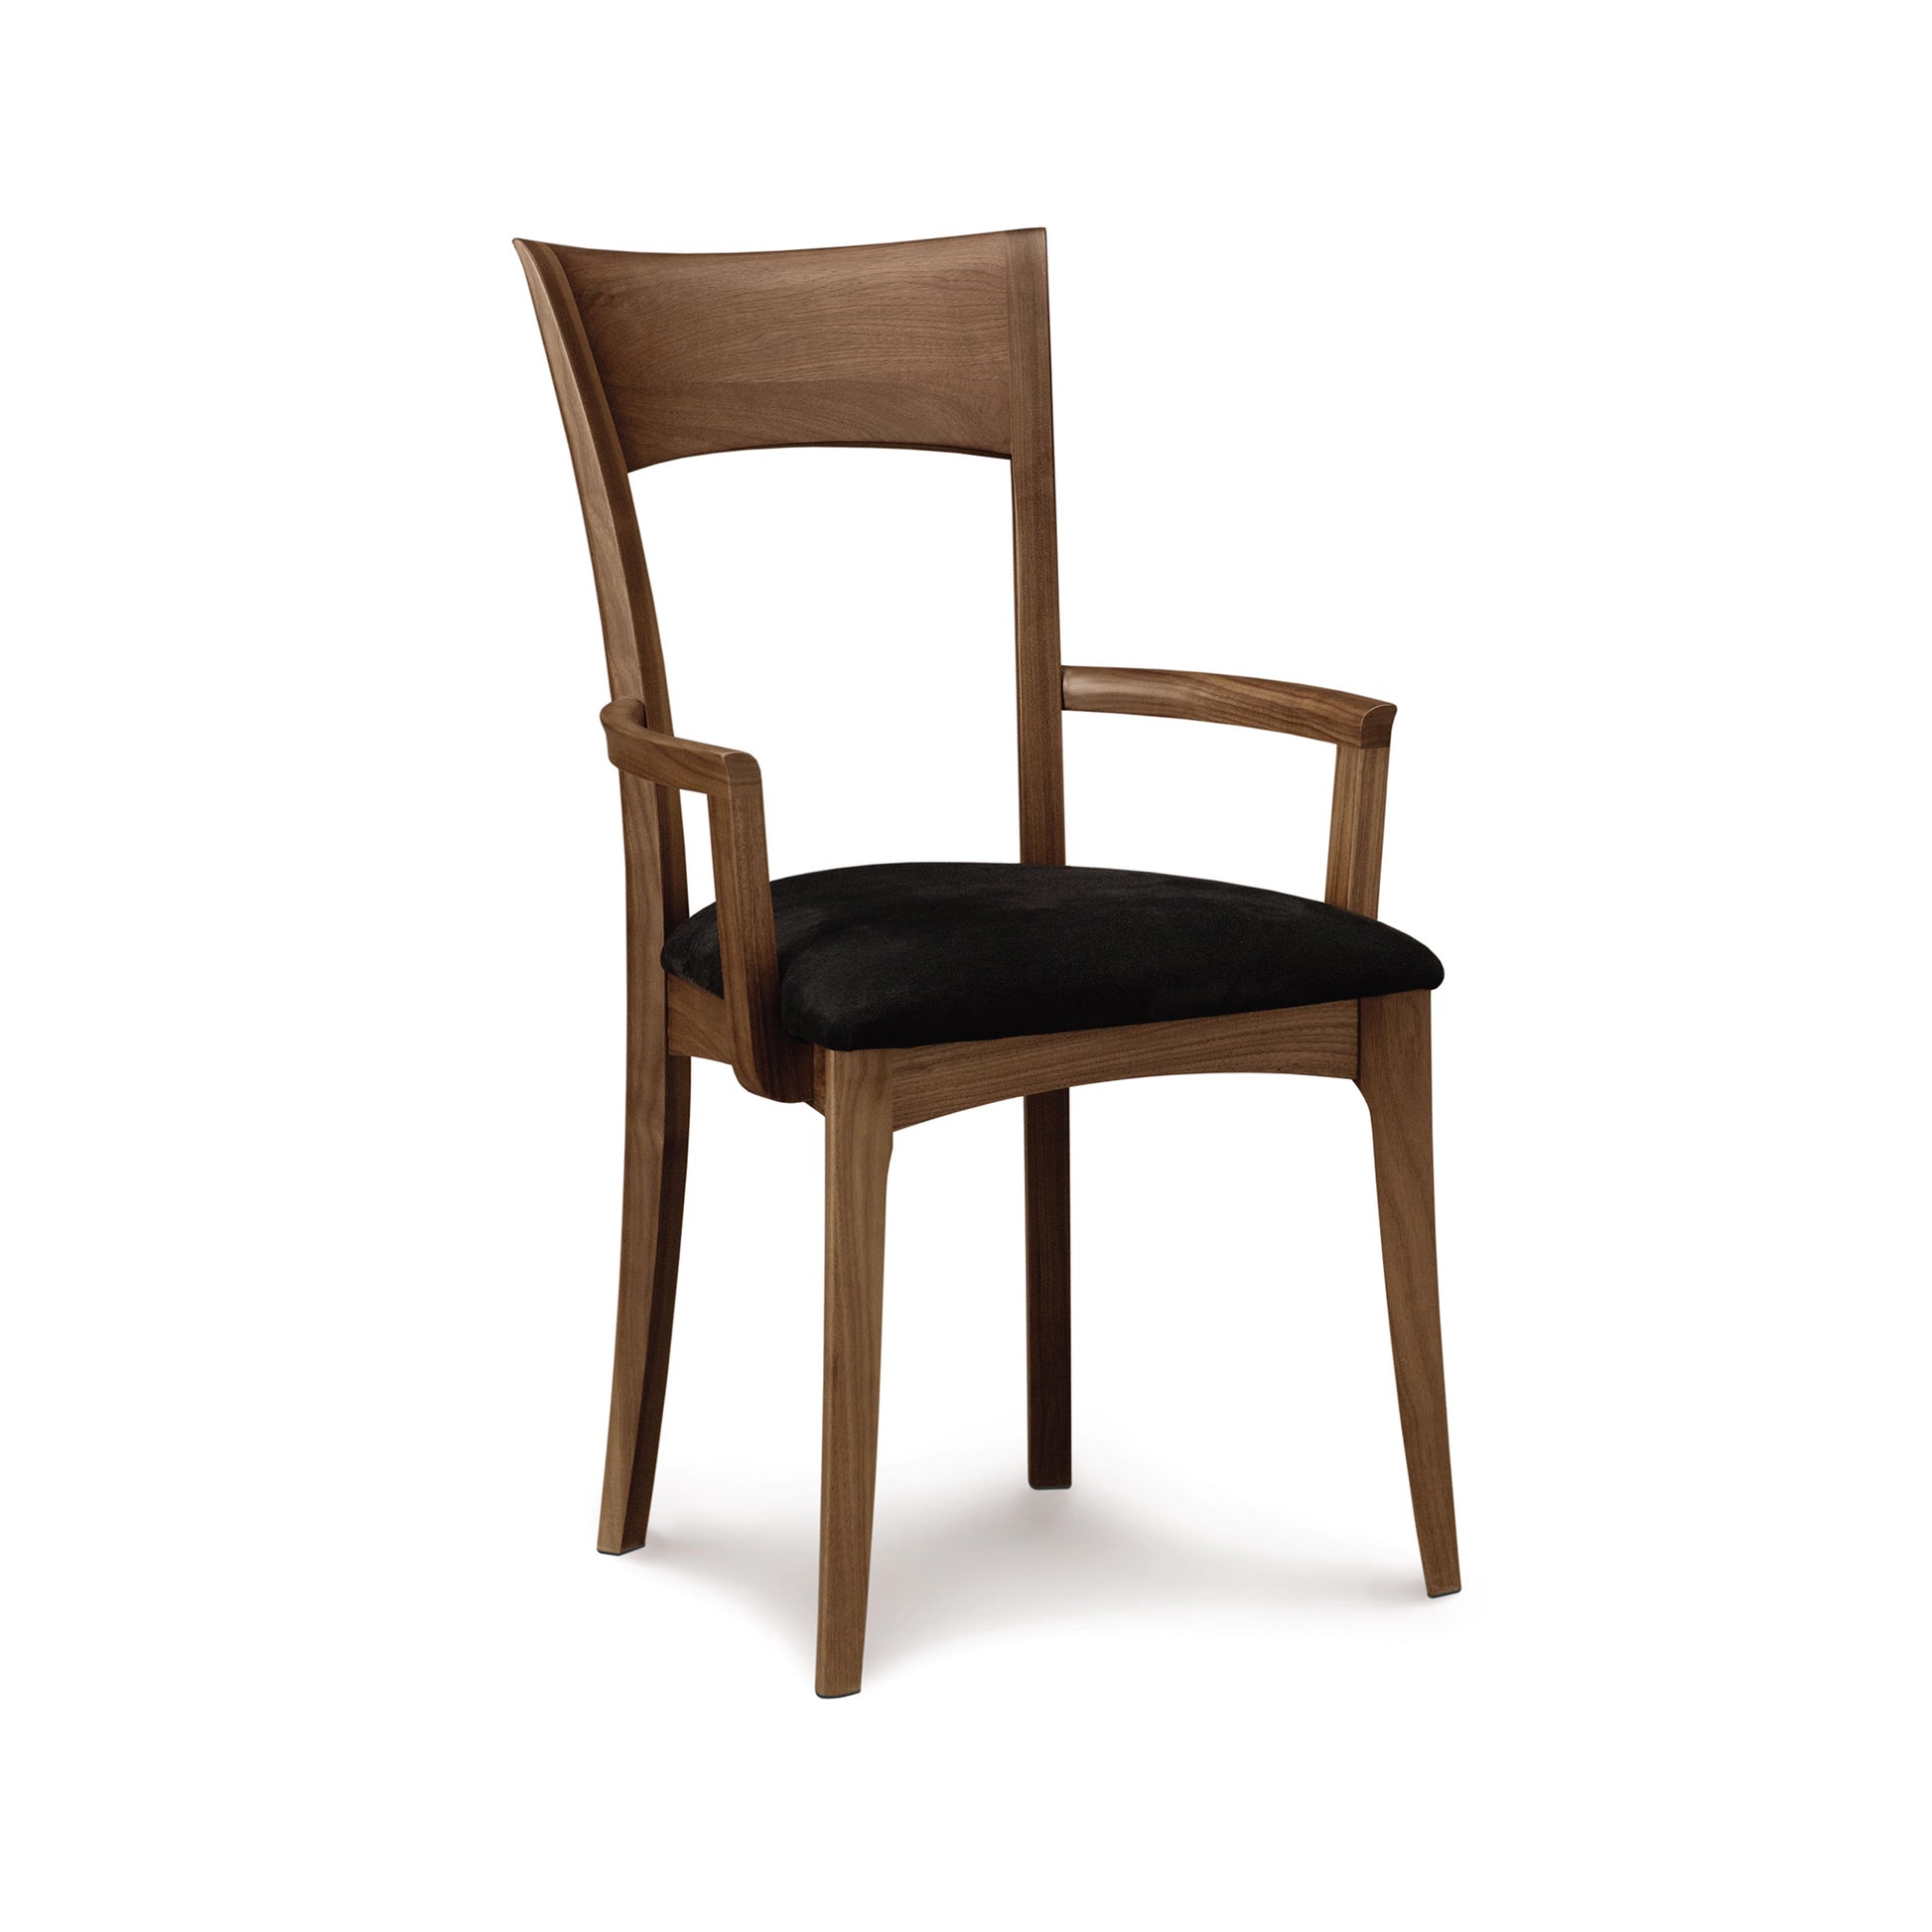 A solid Copeland Furniture Ingrid Chair made of American cherry wood with a black cushion on a white background.